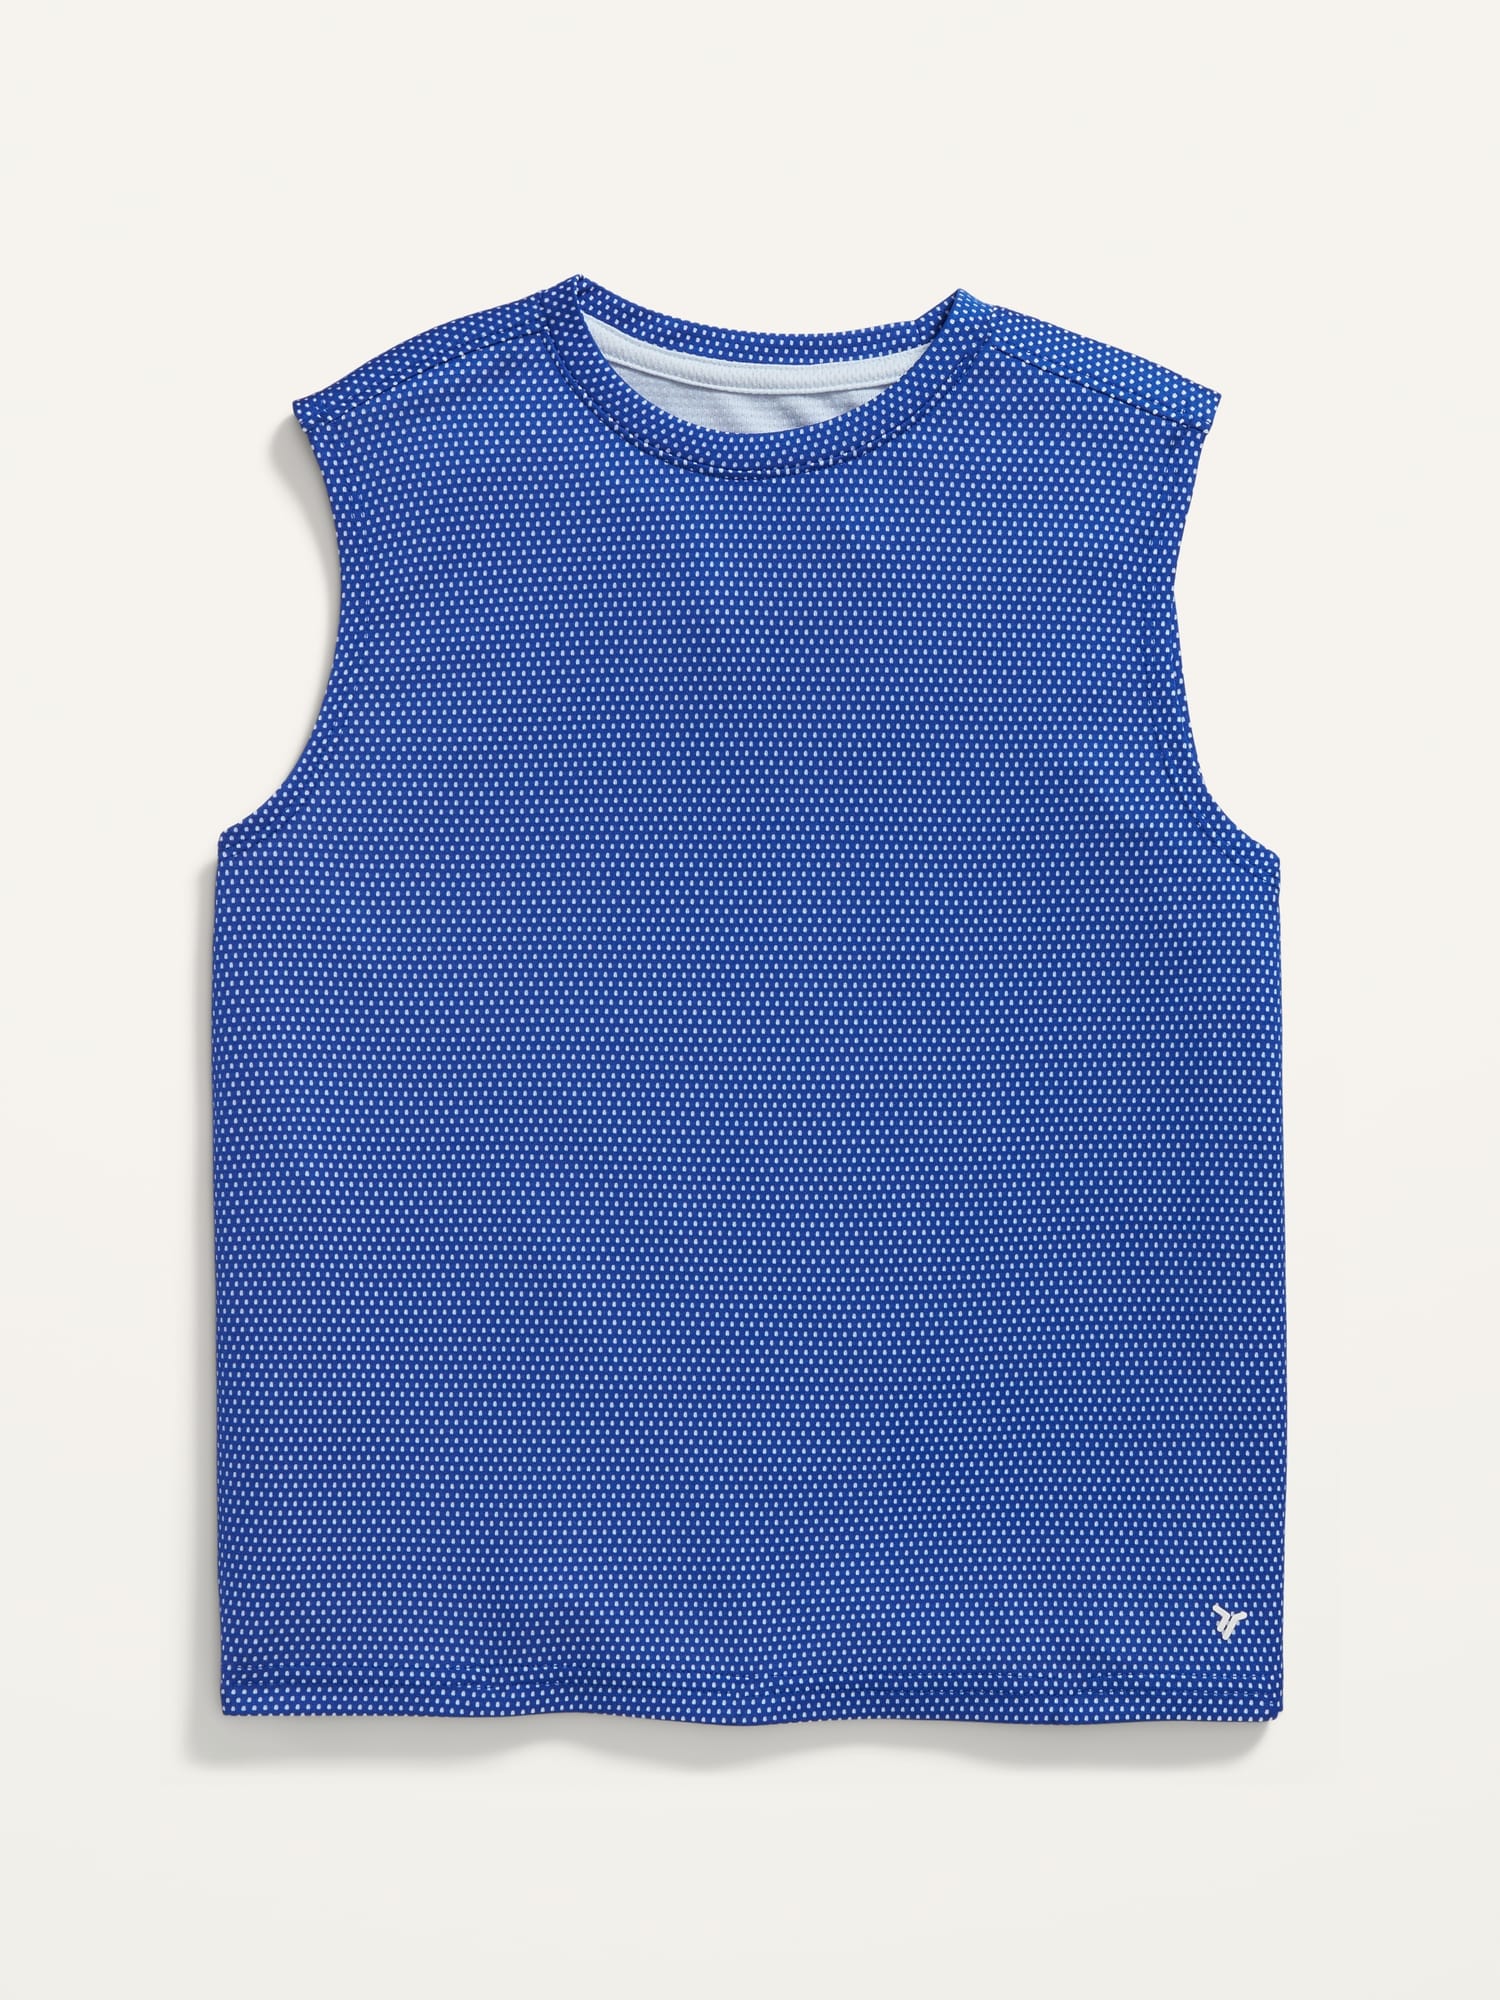 Go-Dry Cool Two-Tone Textured-Knit Performance Tank Top for Boys